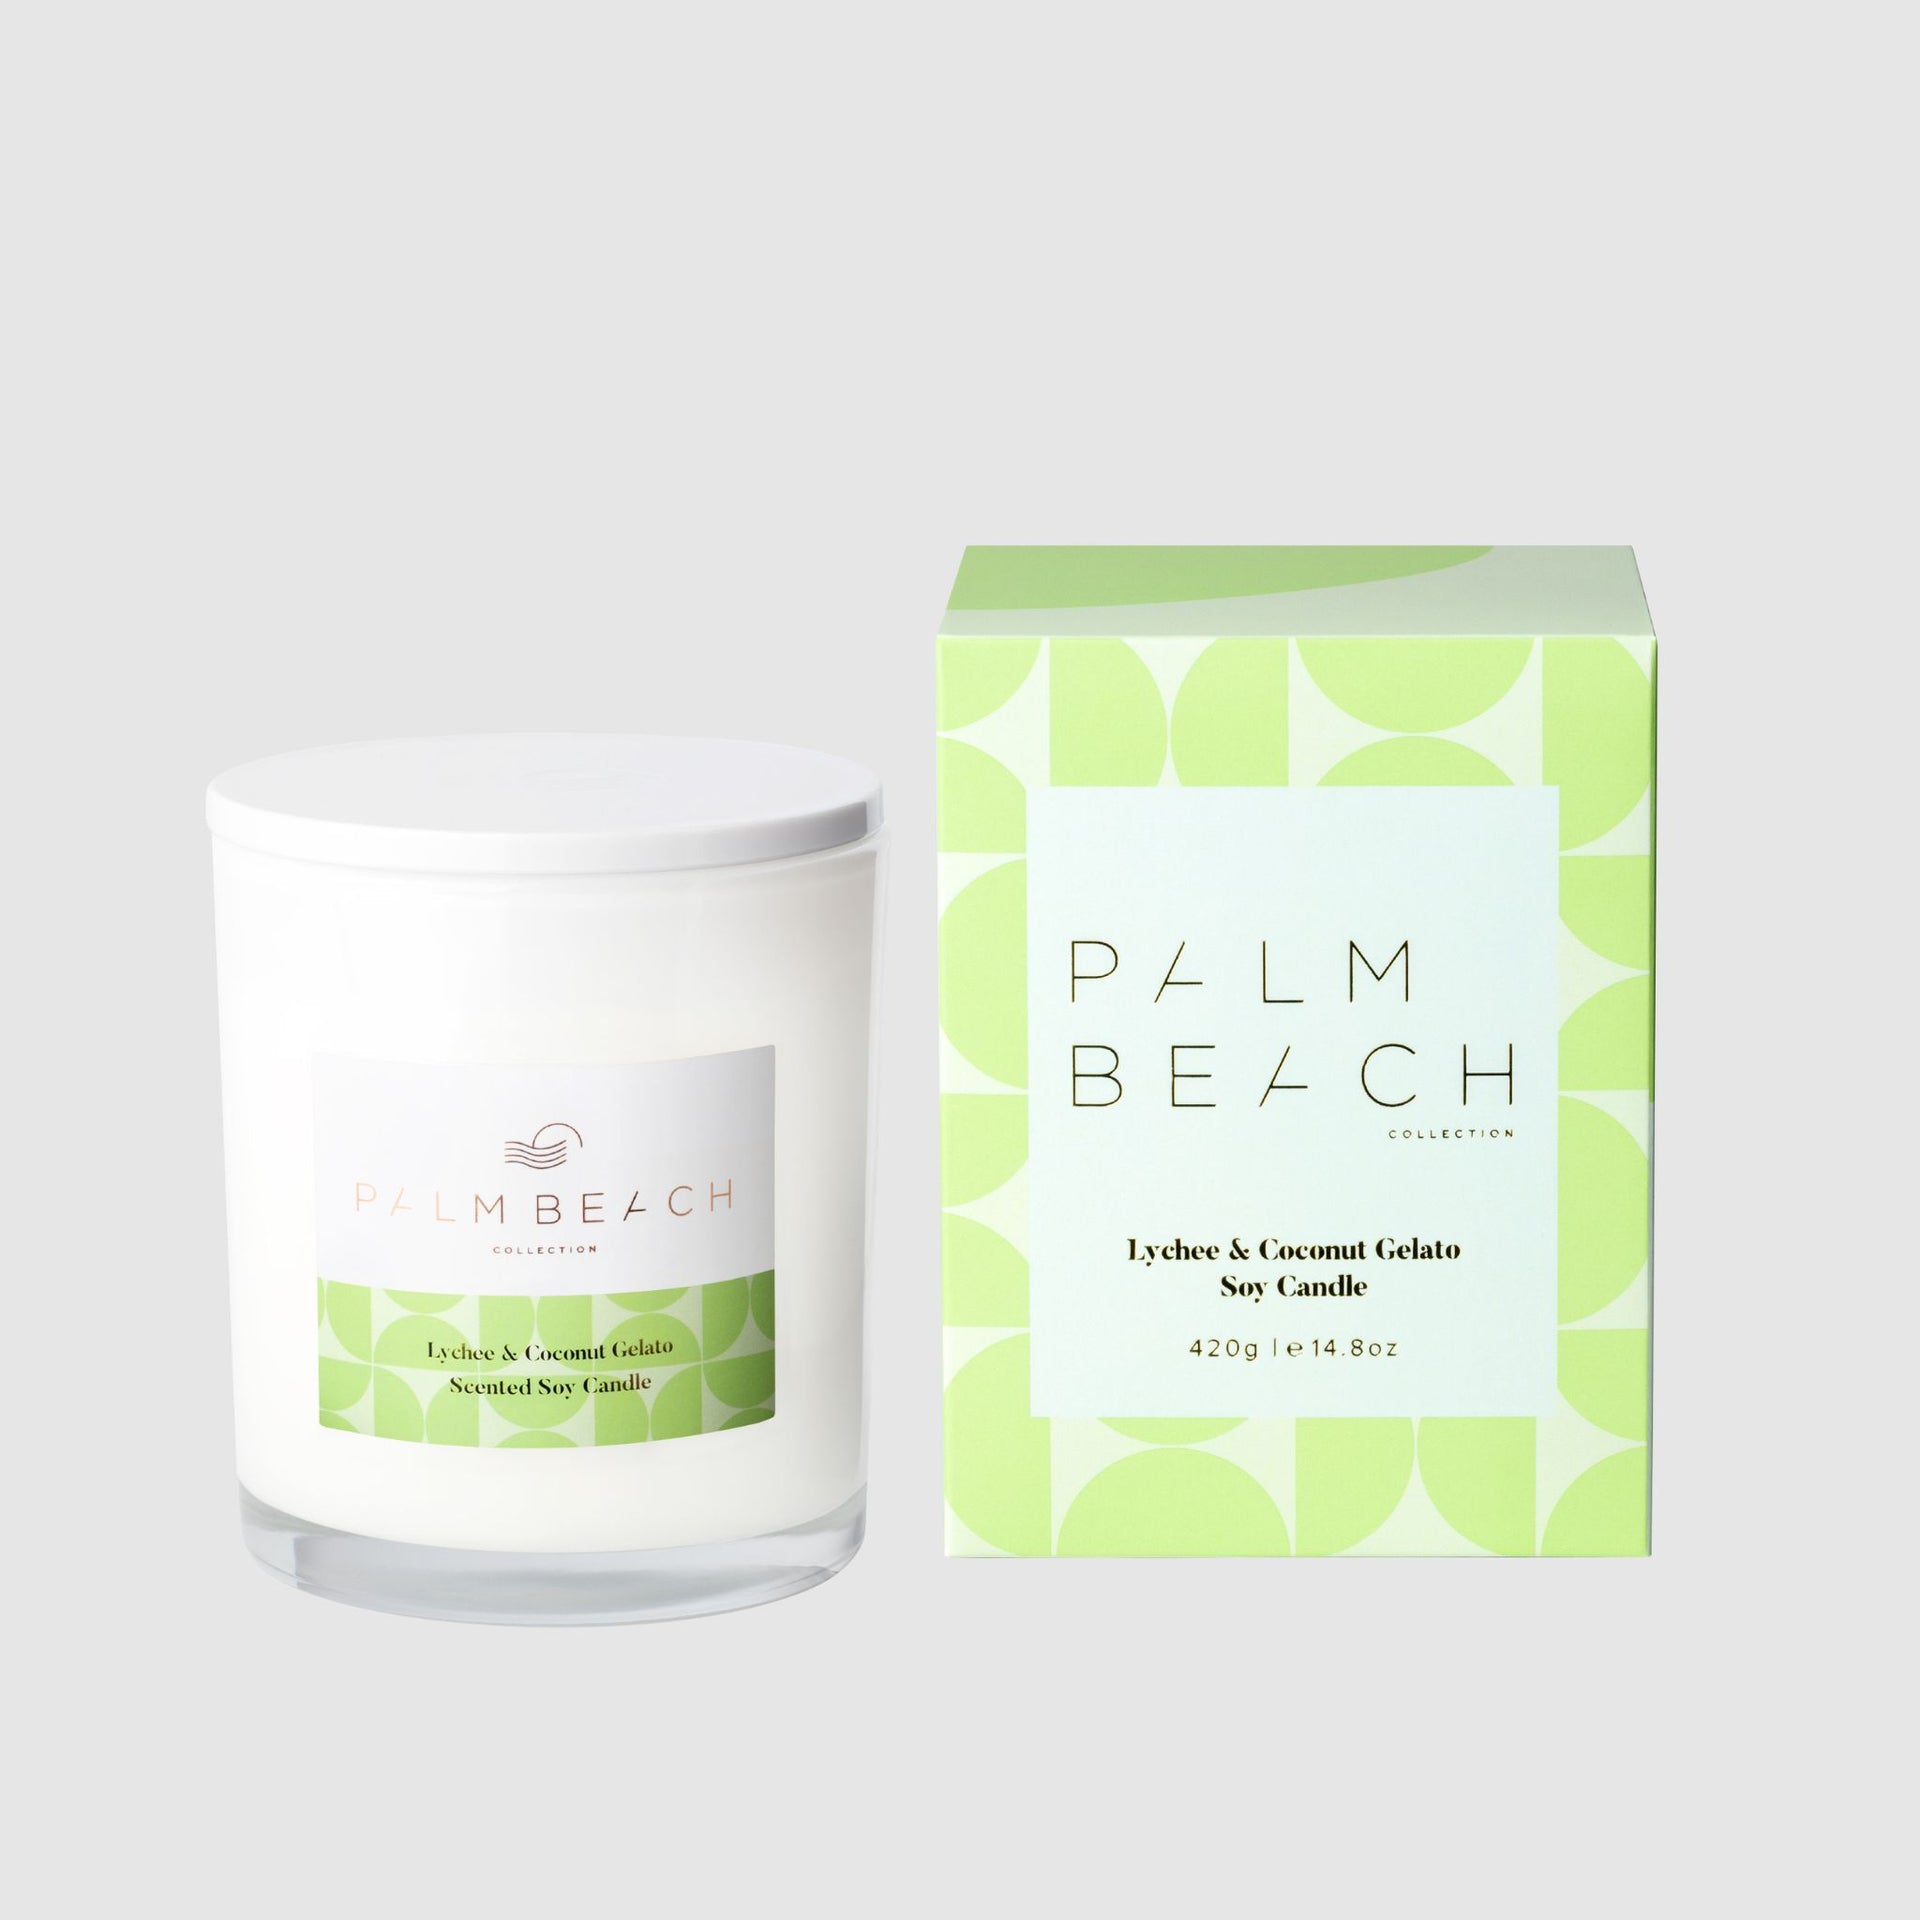 Lychee & Coconut Gelato <br> 420g Limited Edition Standard Candle